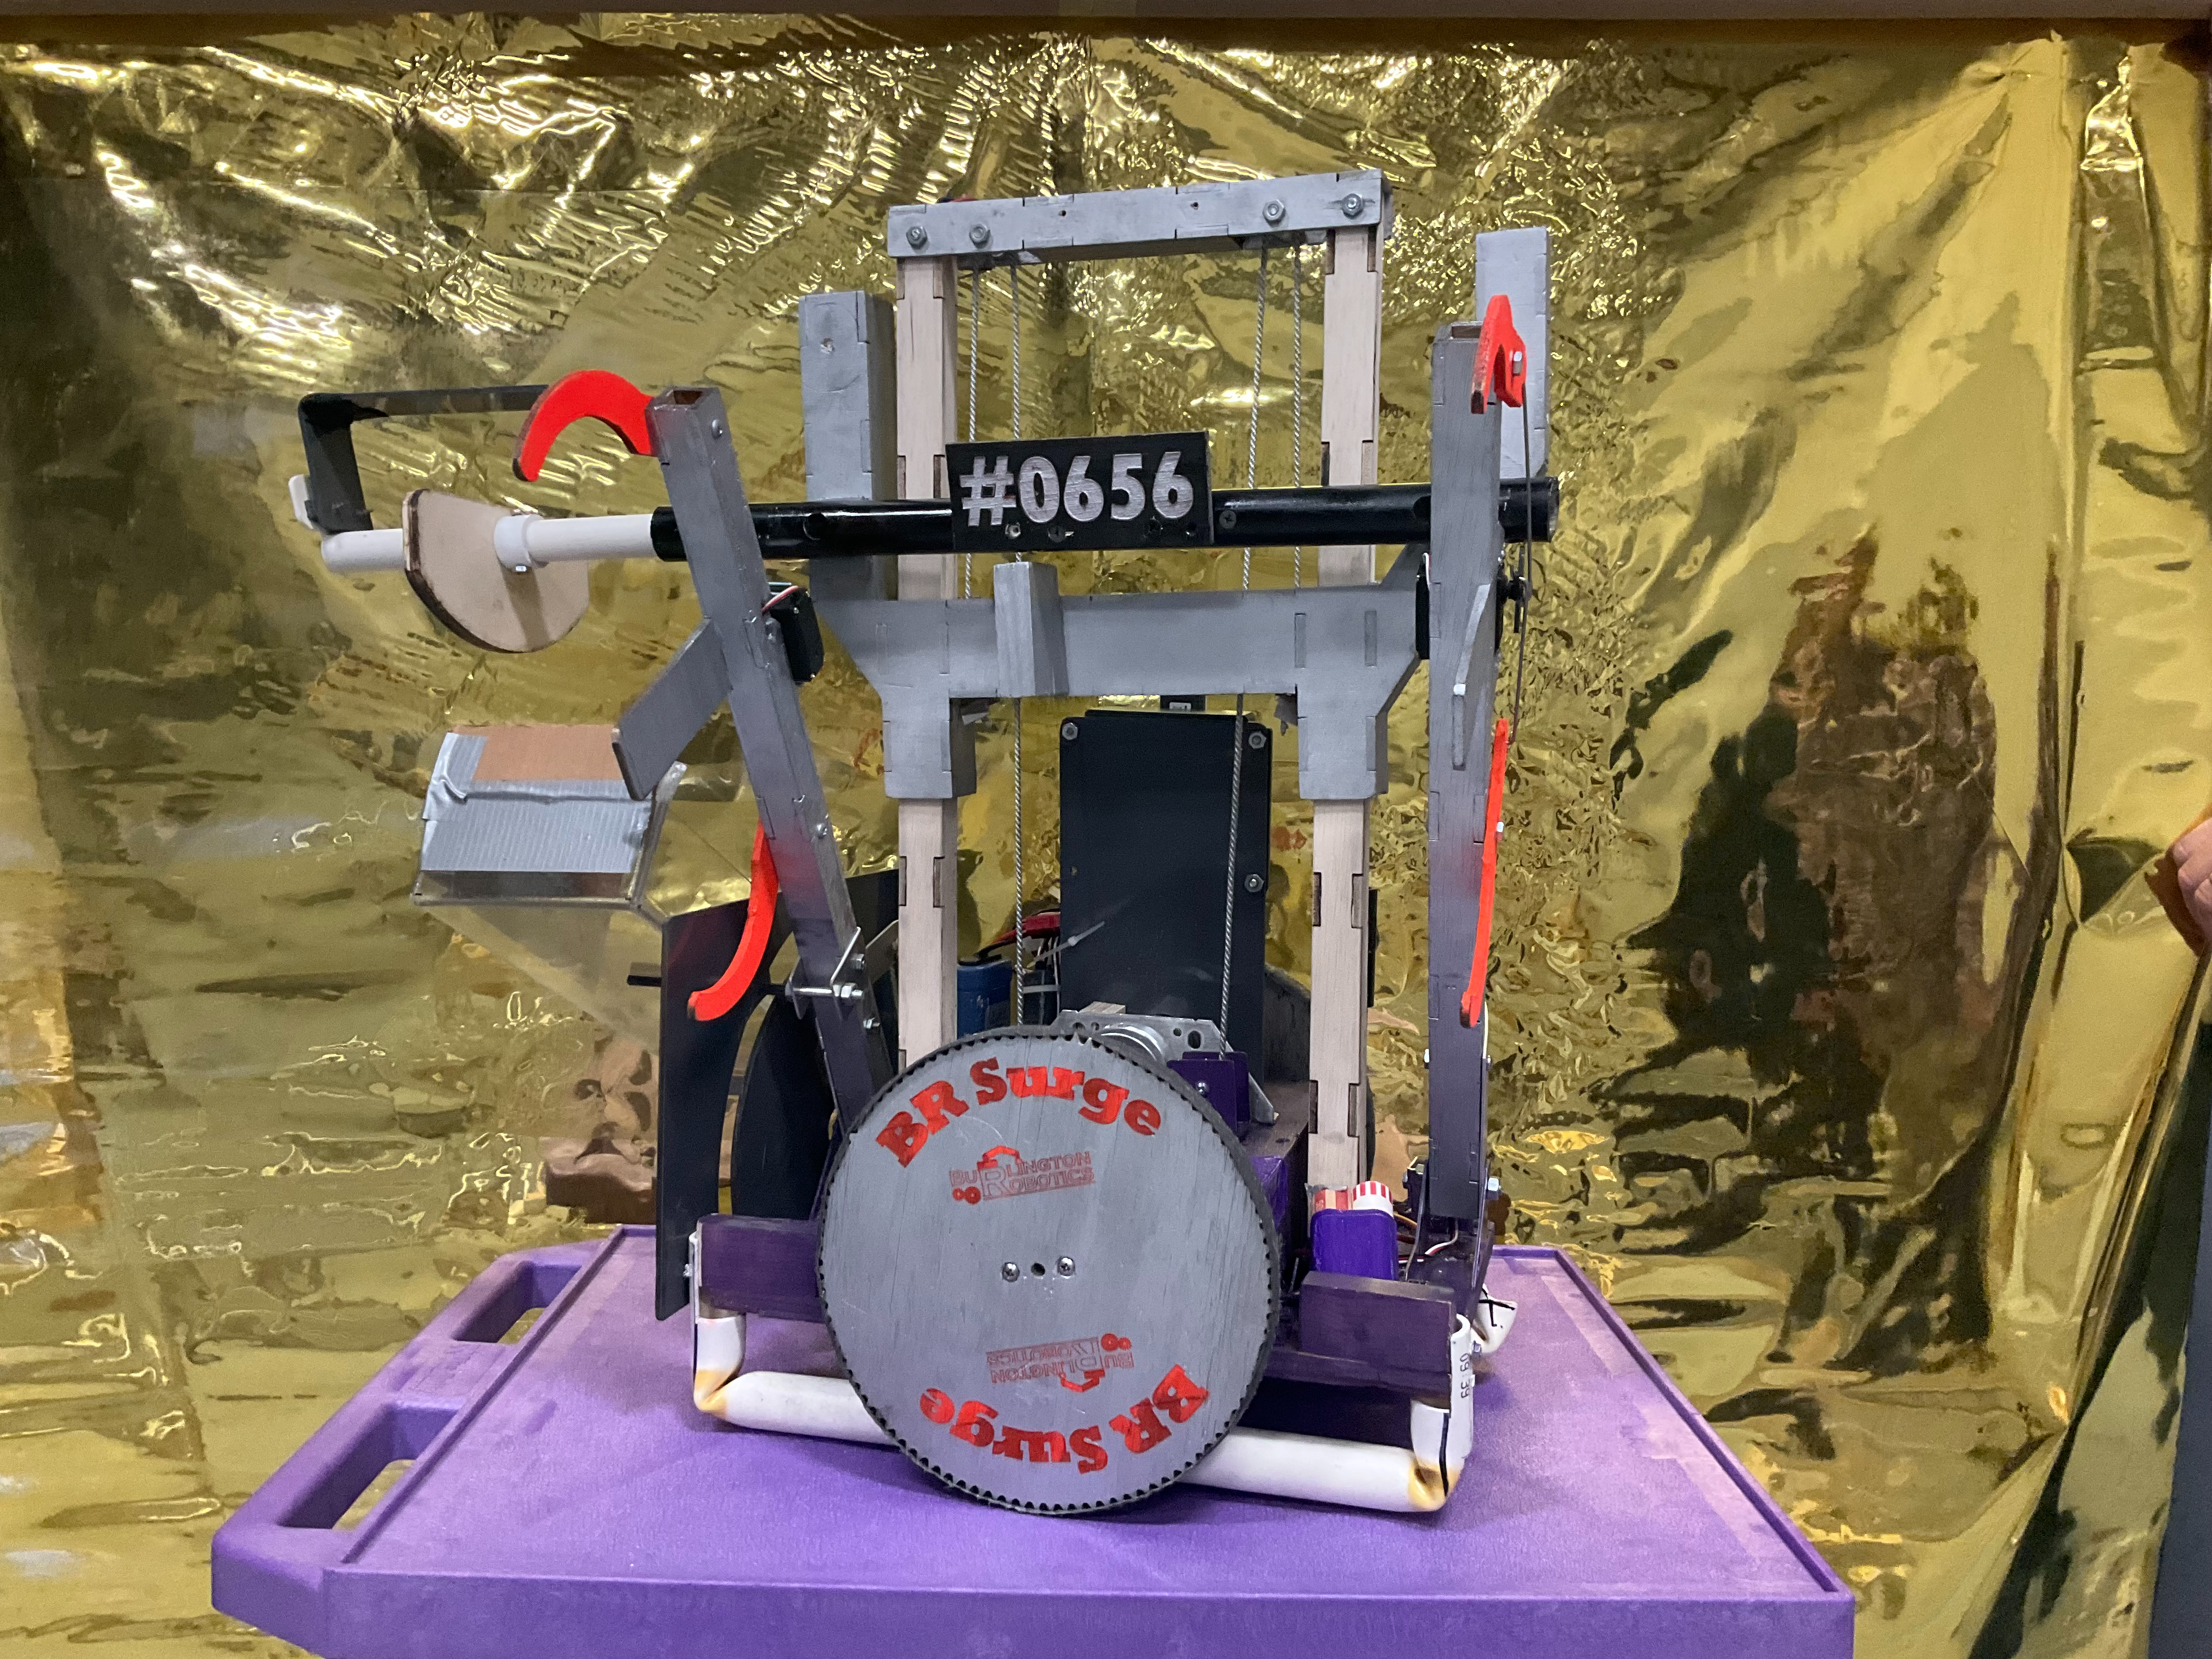 A photo of a Final Project from the Robotics Team